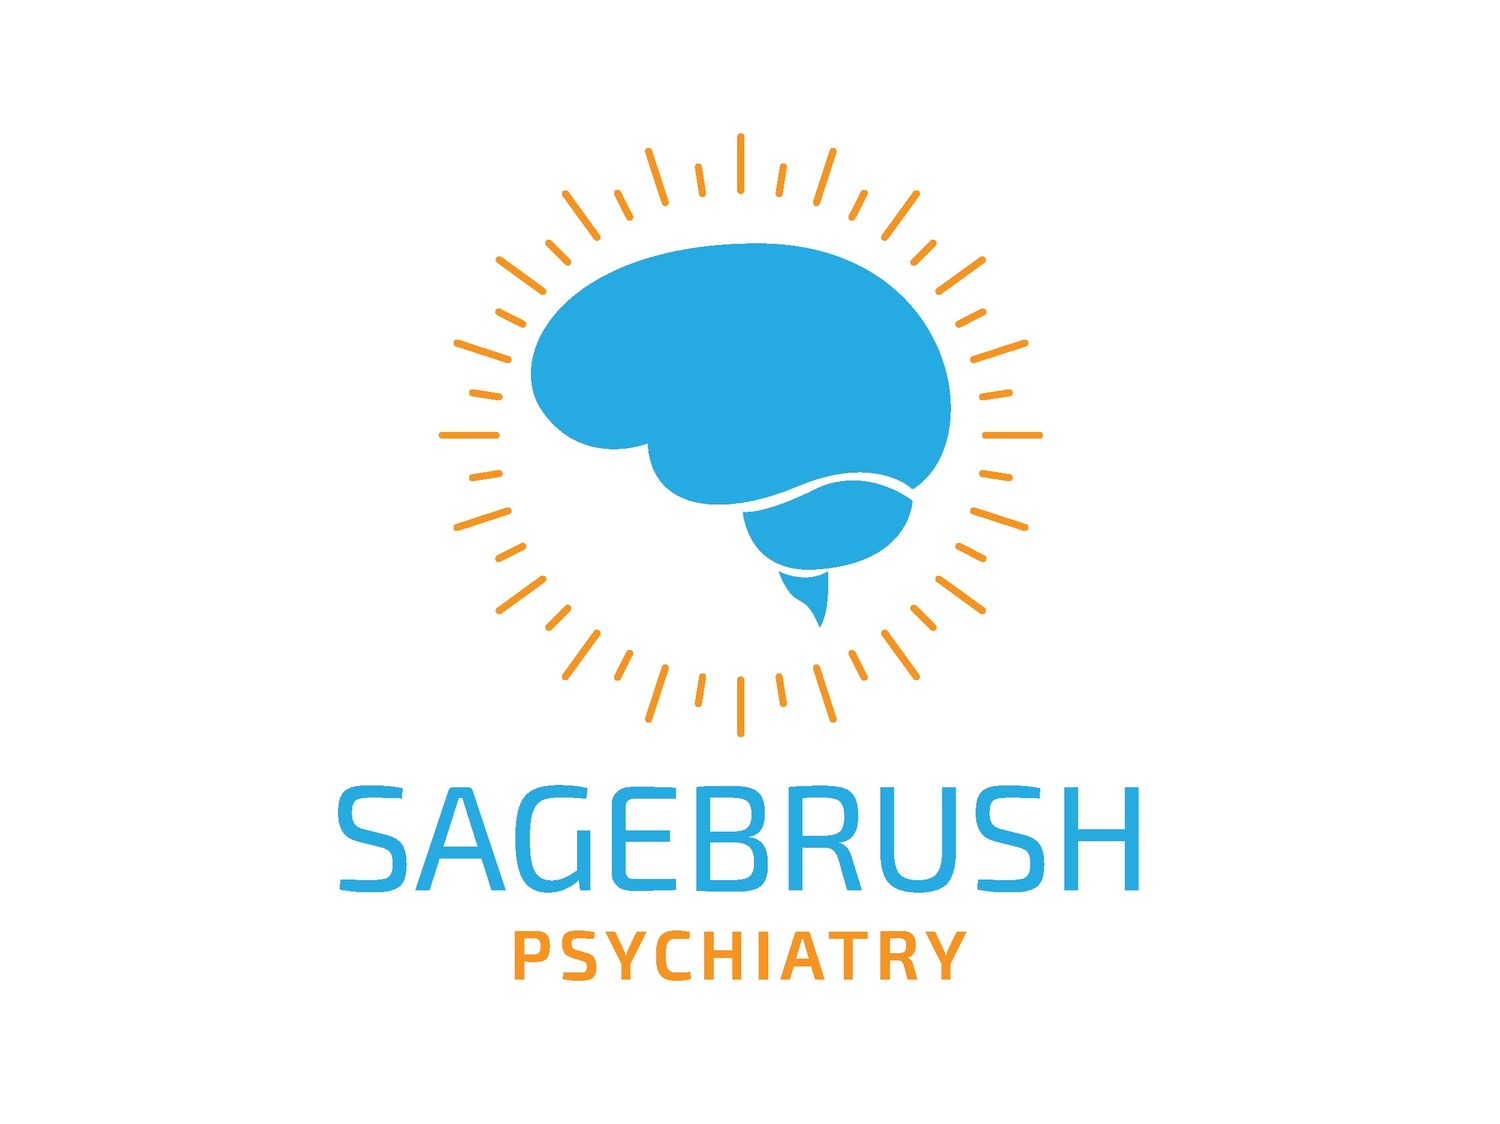 Gallery Photo of Visit: SagebrushPsychiatry.com to request an appointment today.